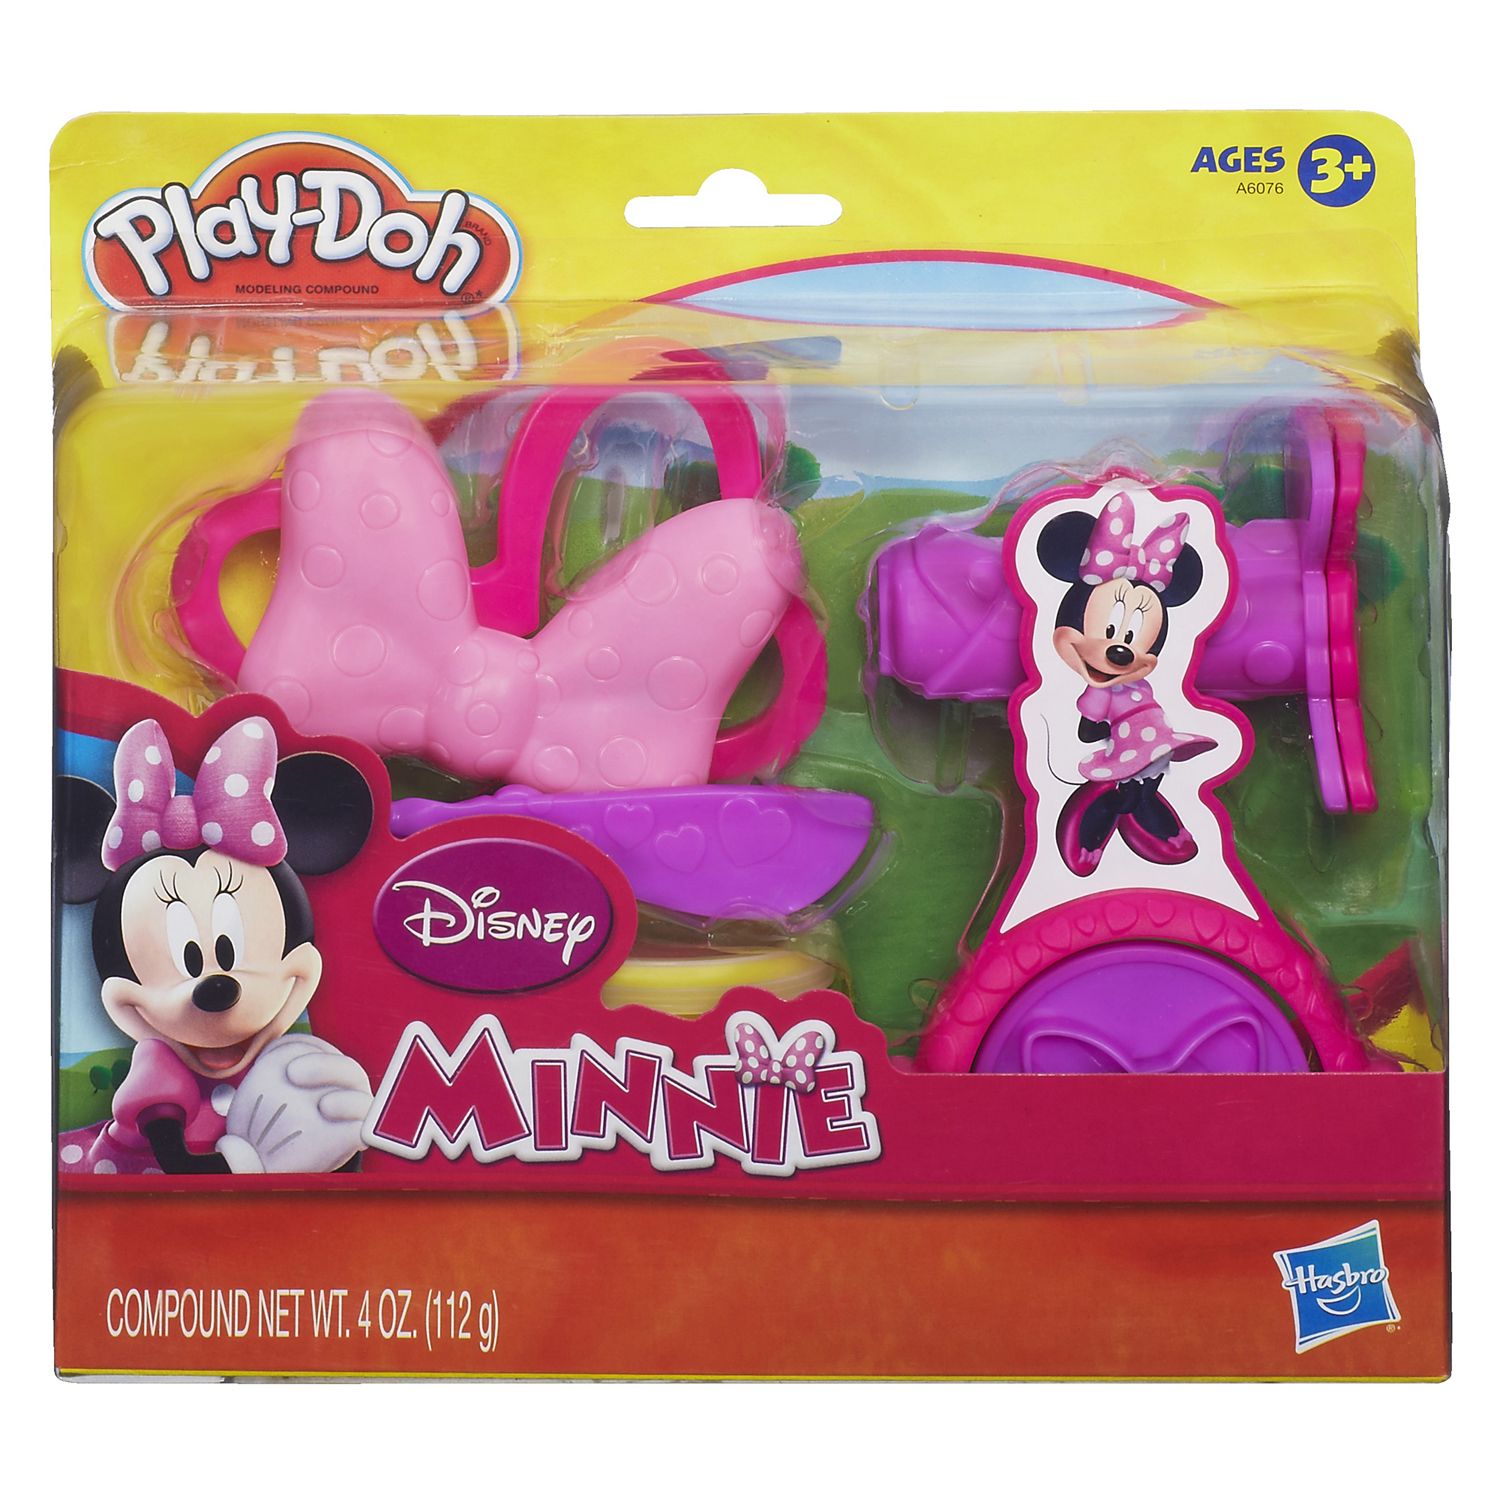 play doh minnie mouse treats